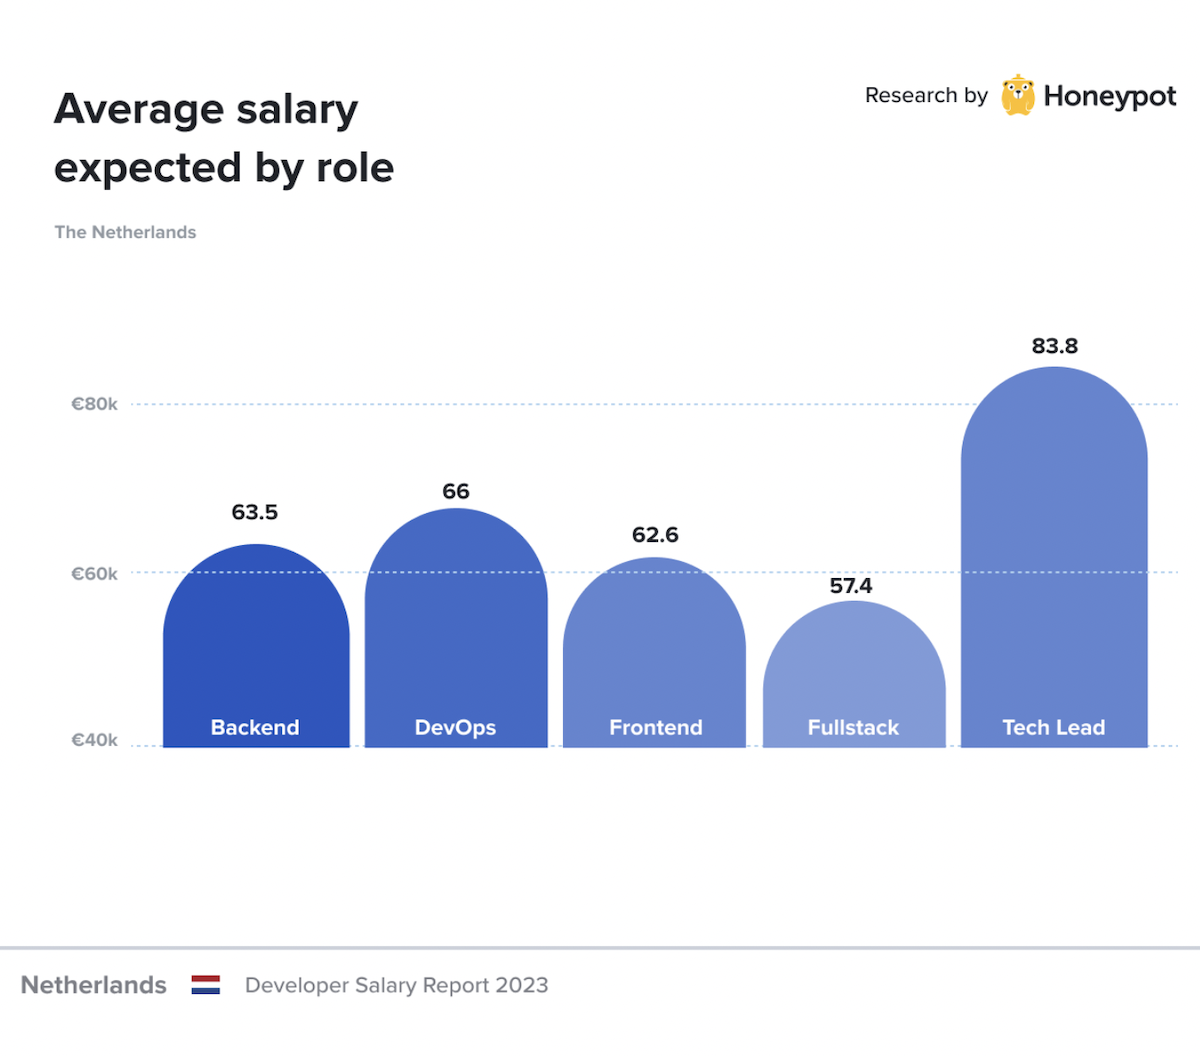 Netherlands – Average expected salary by role